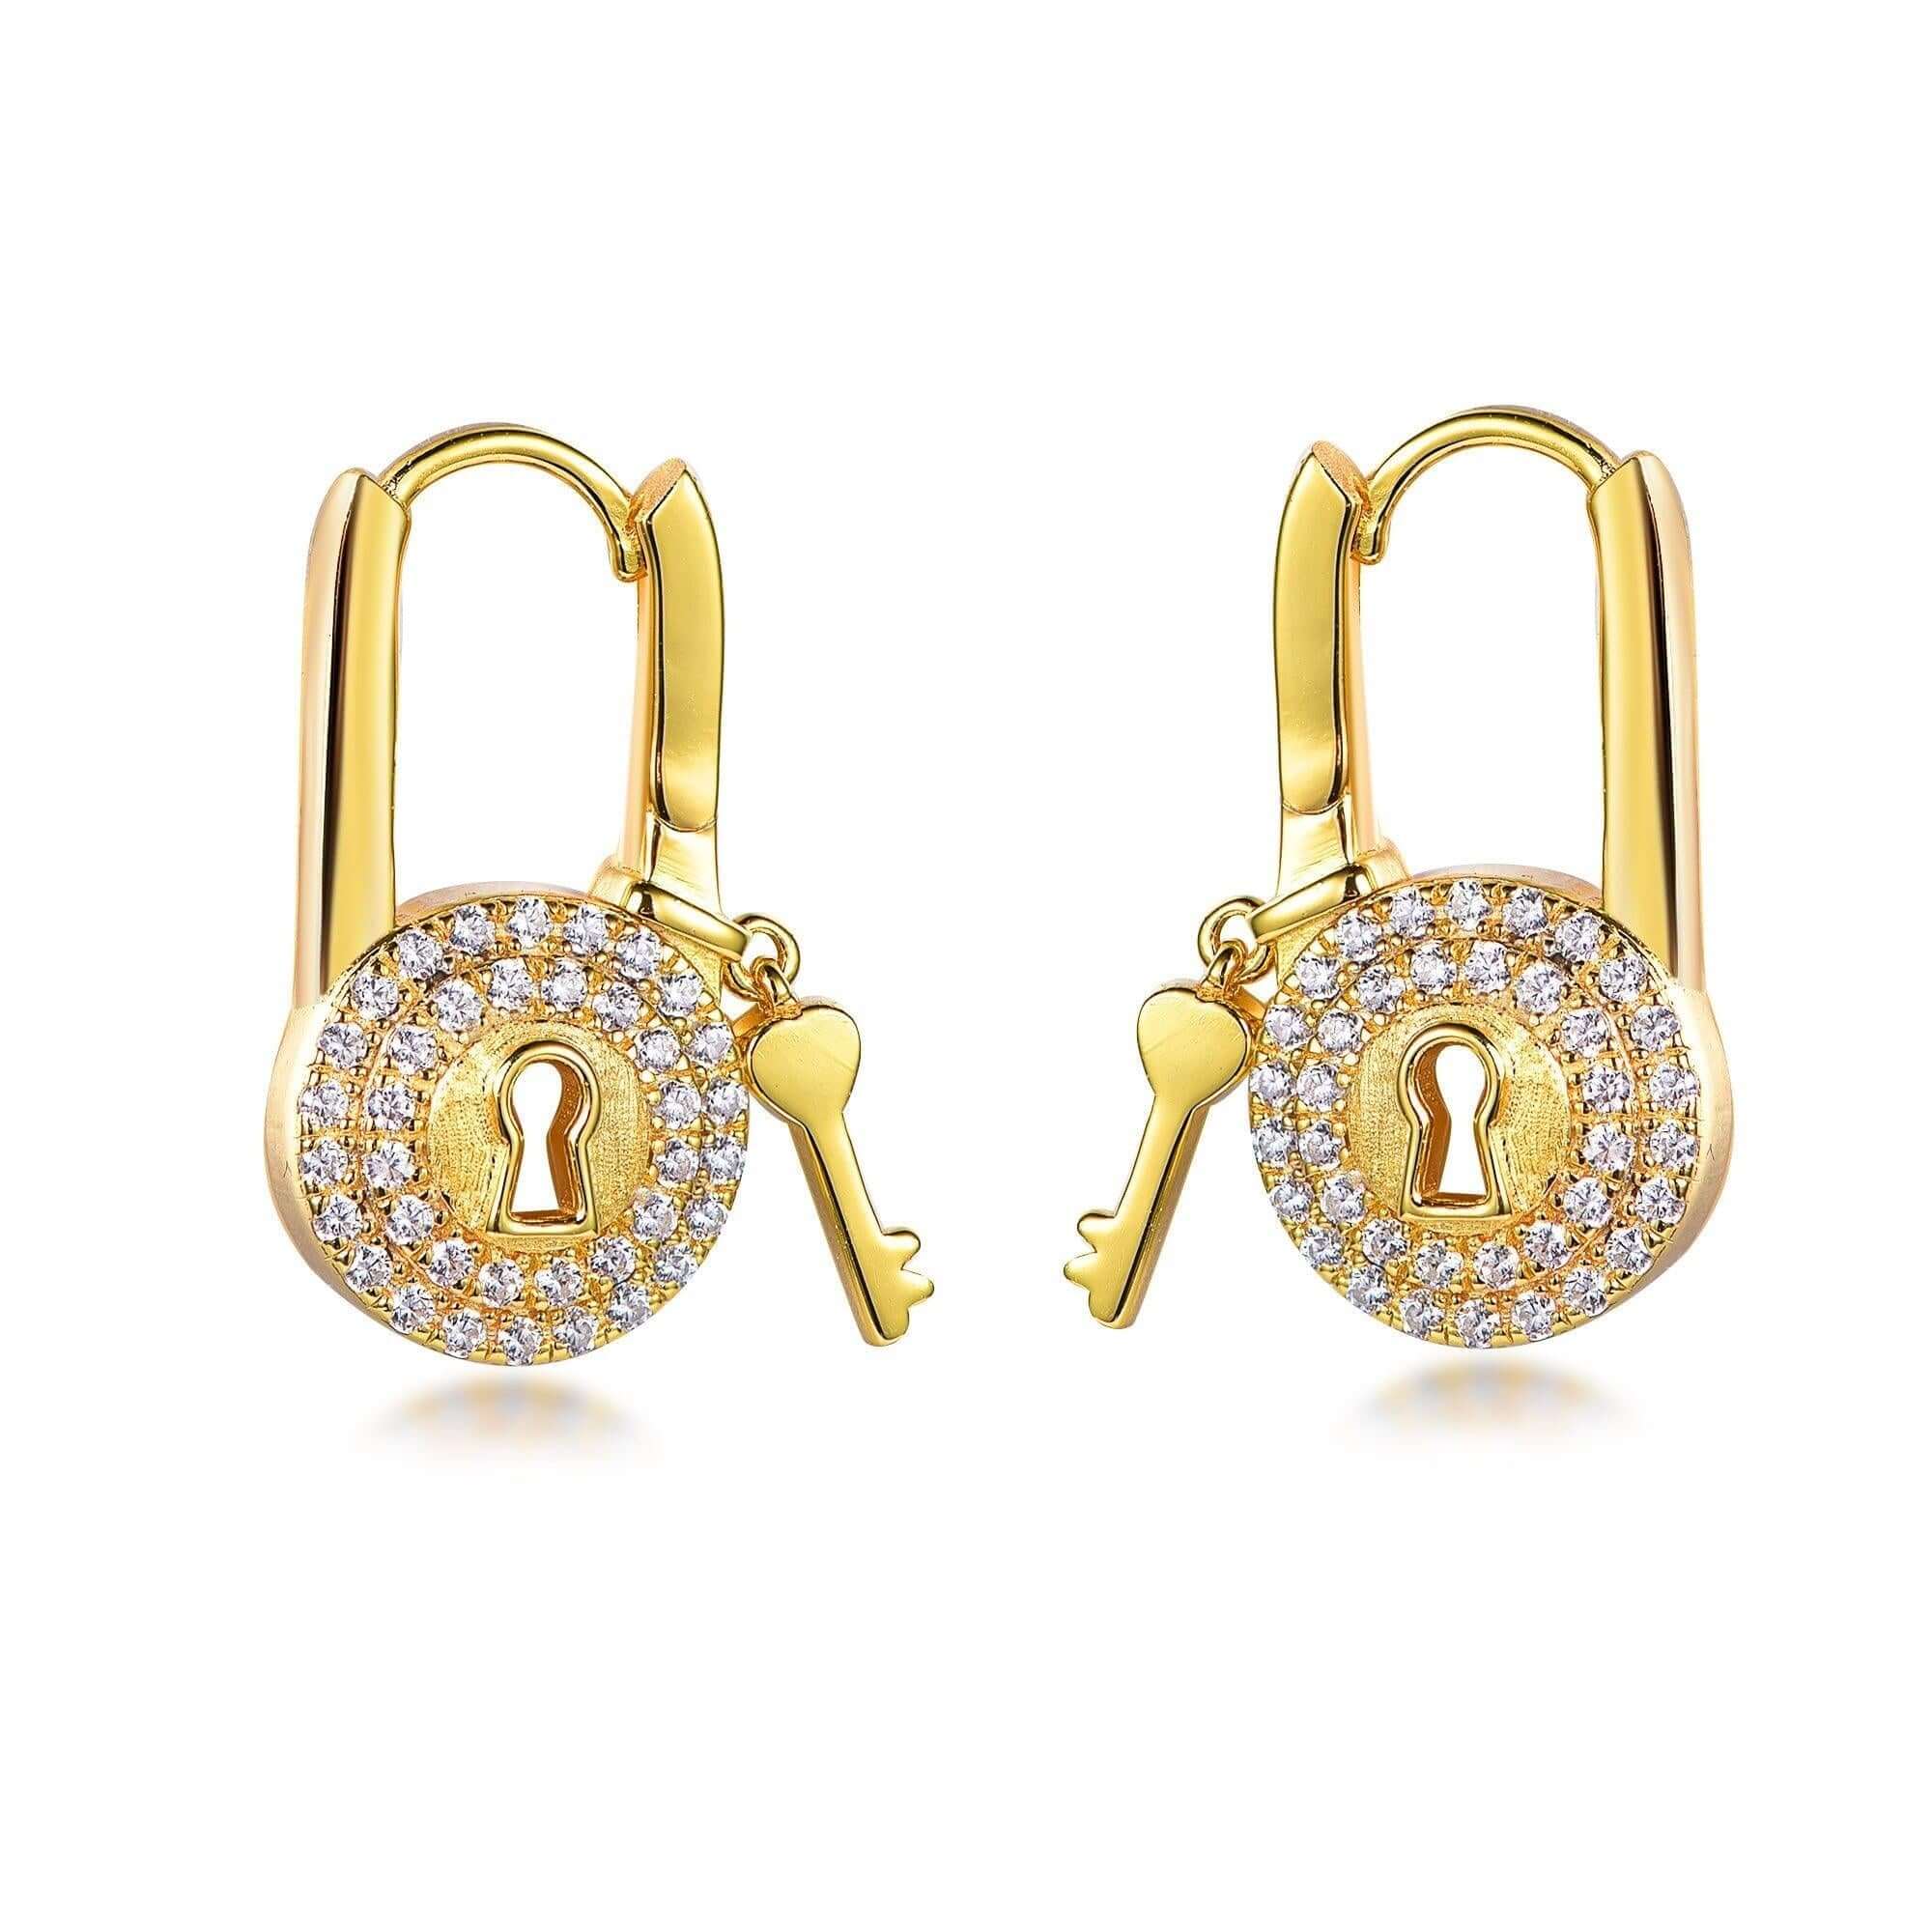 Sterling Silver And 18ct Gold Plated Lock And Key Earrings